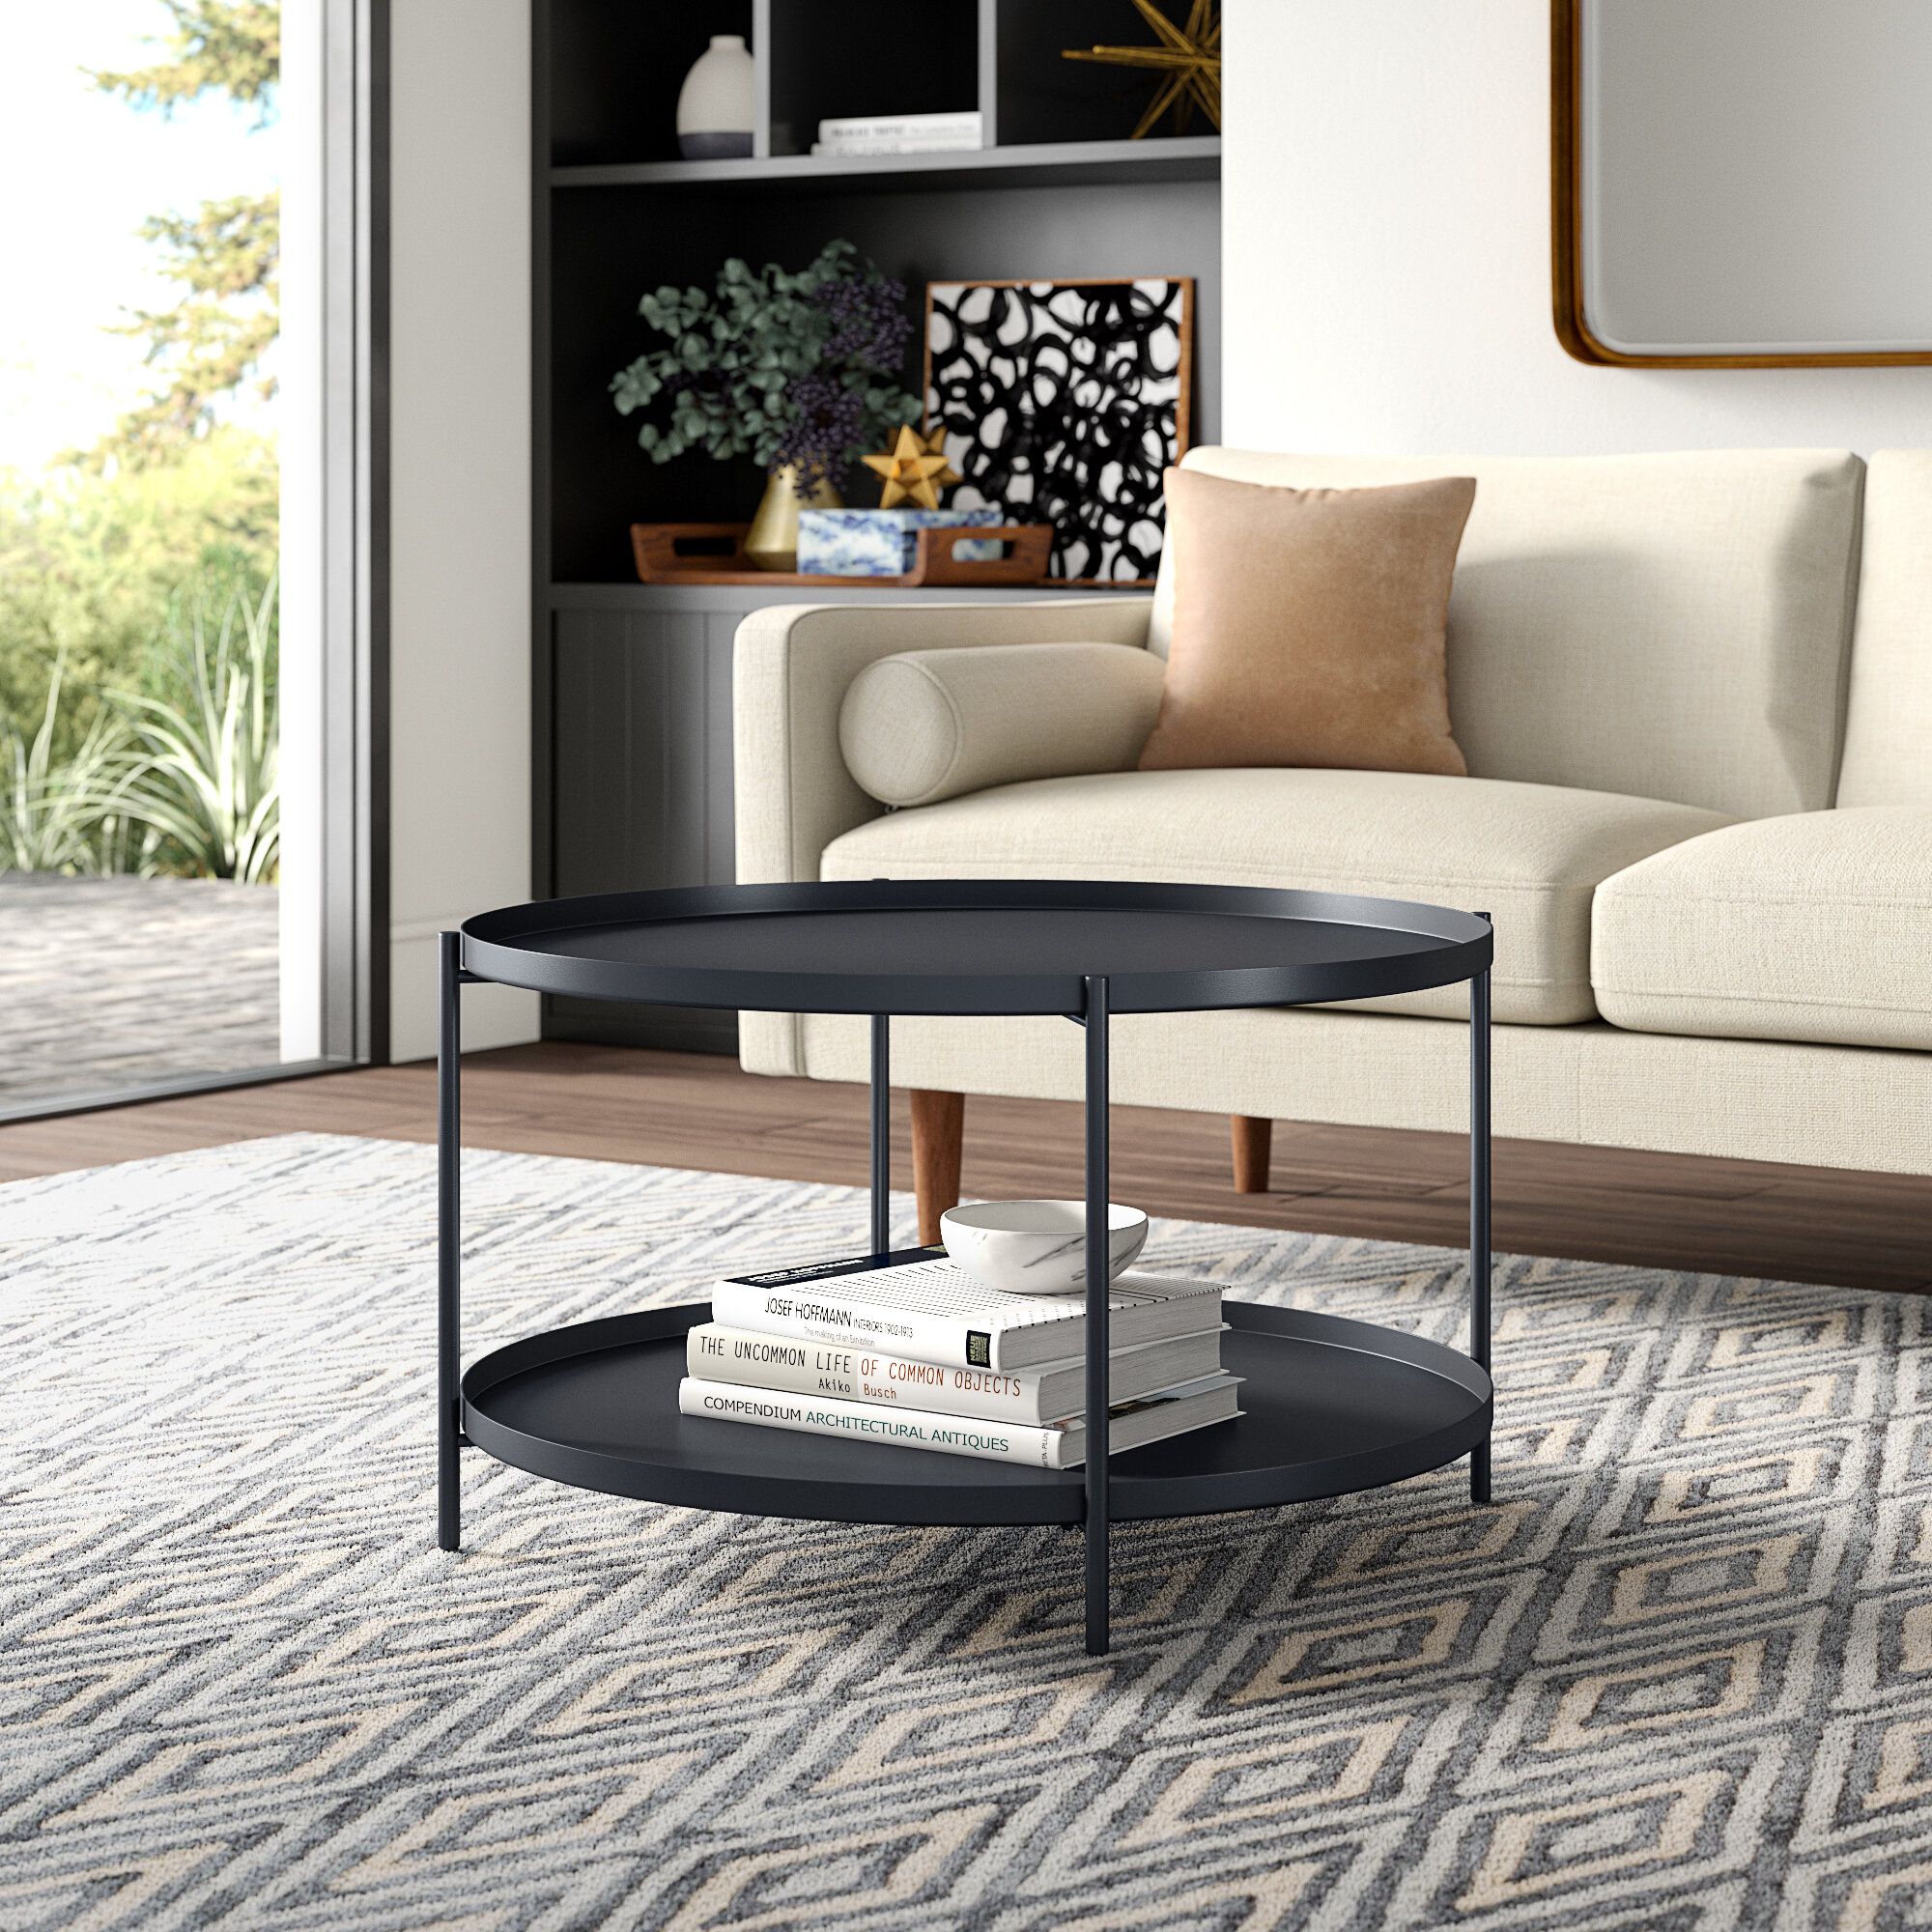 Wade Logan® Atkisson Coffee Table & Reviews | Wayfair With Detachable Tray Coffee Tables (View 11 of 15)